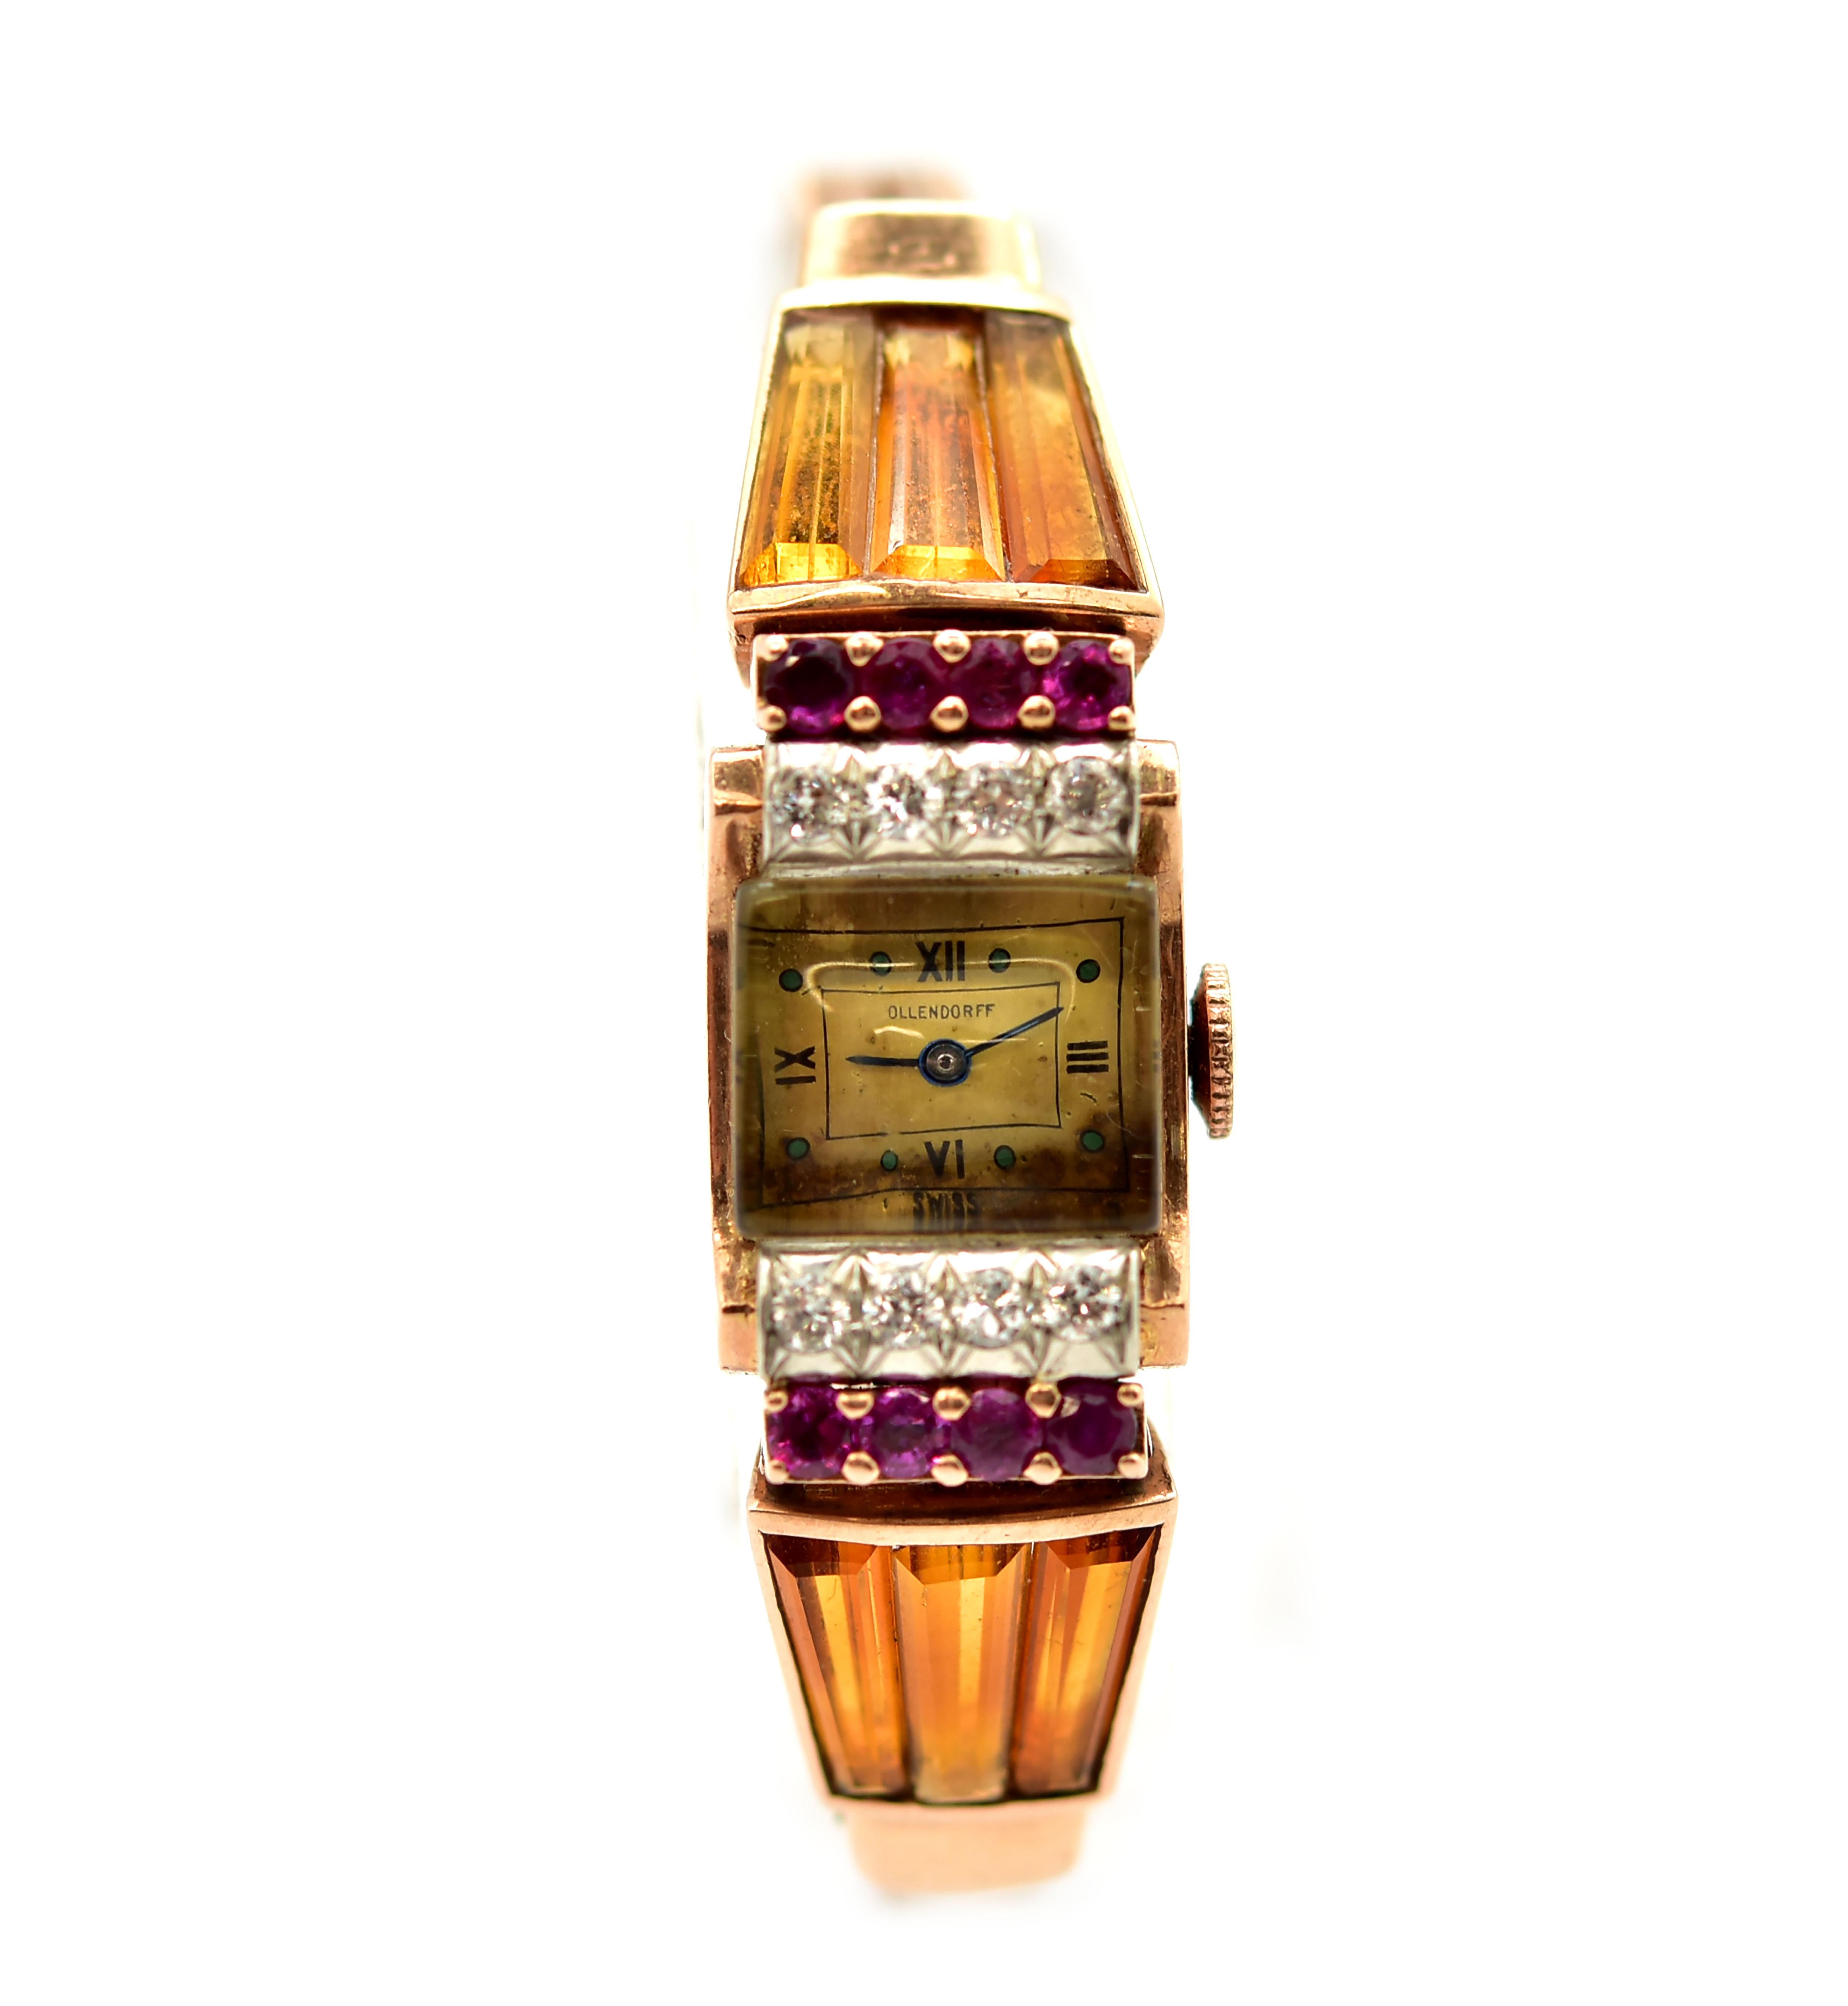 Movement: mechanical
Function: hours, minutes
Case: 14mm rose gold case with diamond and ruby bezel, baguette shaped citrine connecting band and case, protective crystal
Band: double rose gold stretch band with opening clasp
Dial: champagne colored